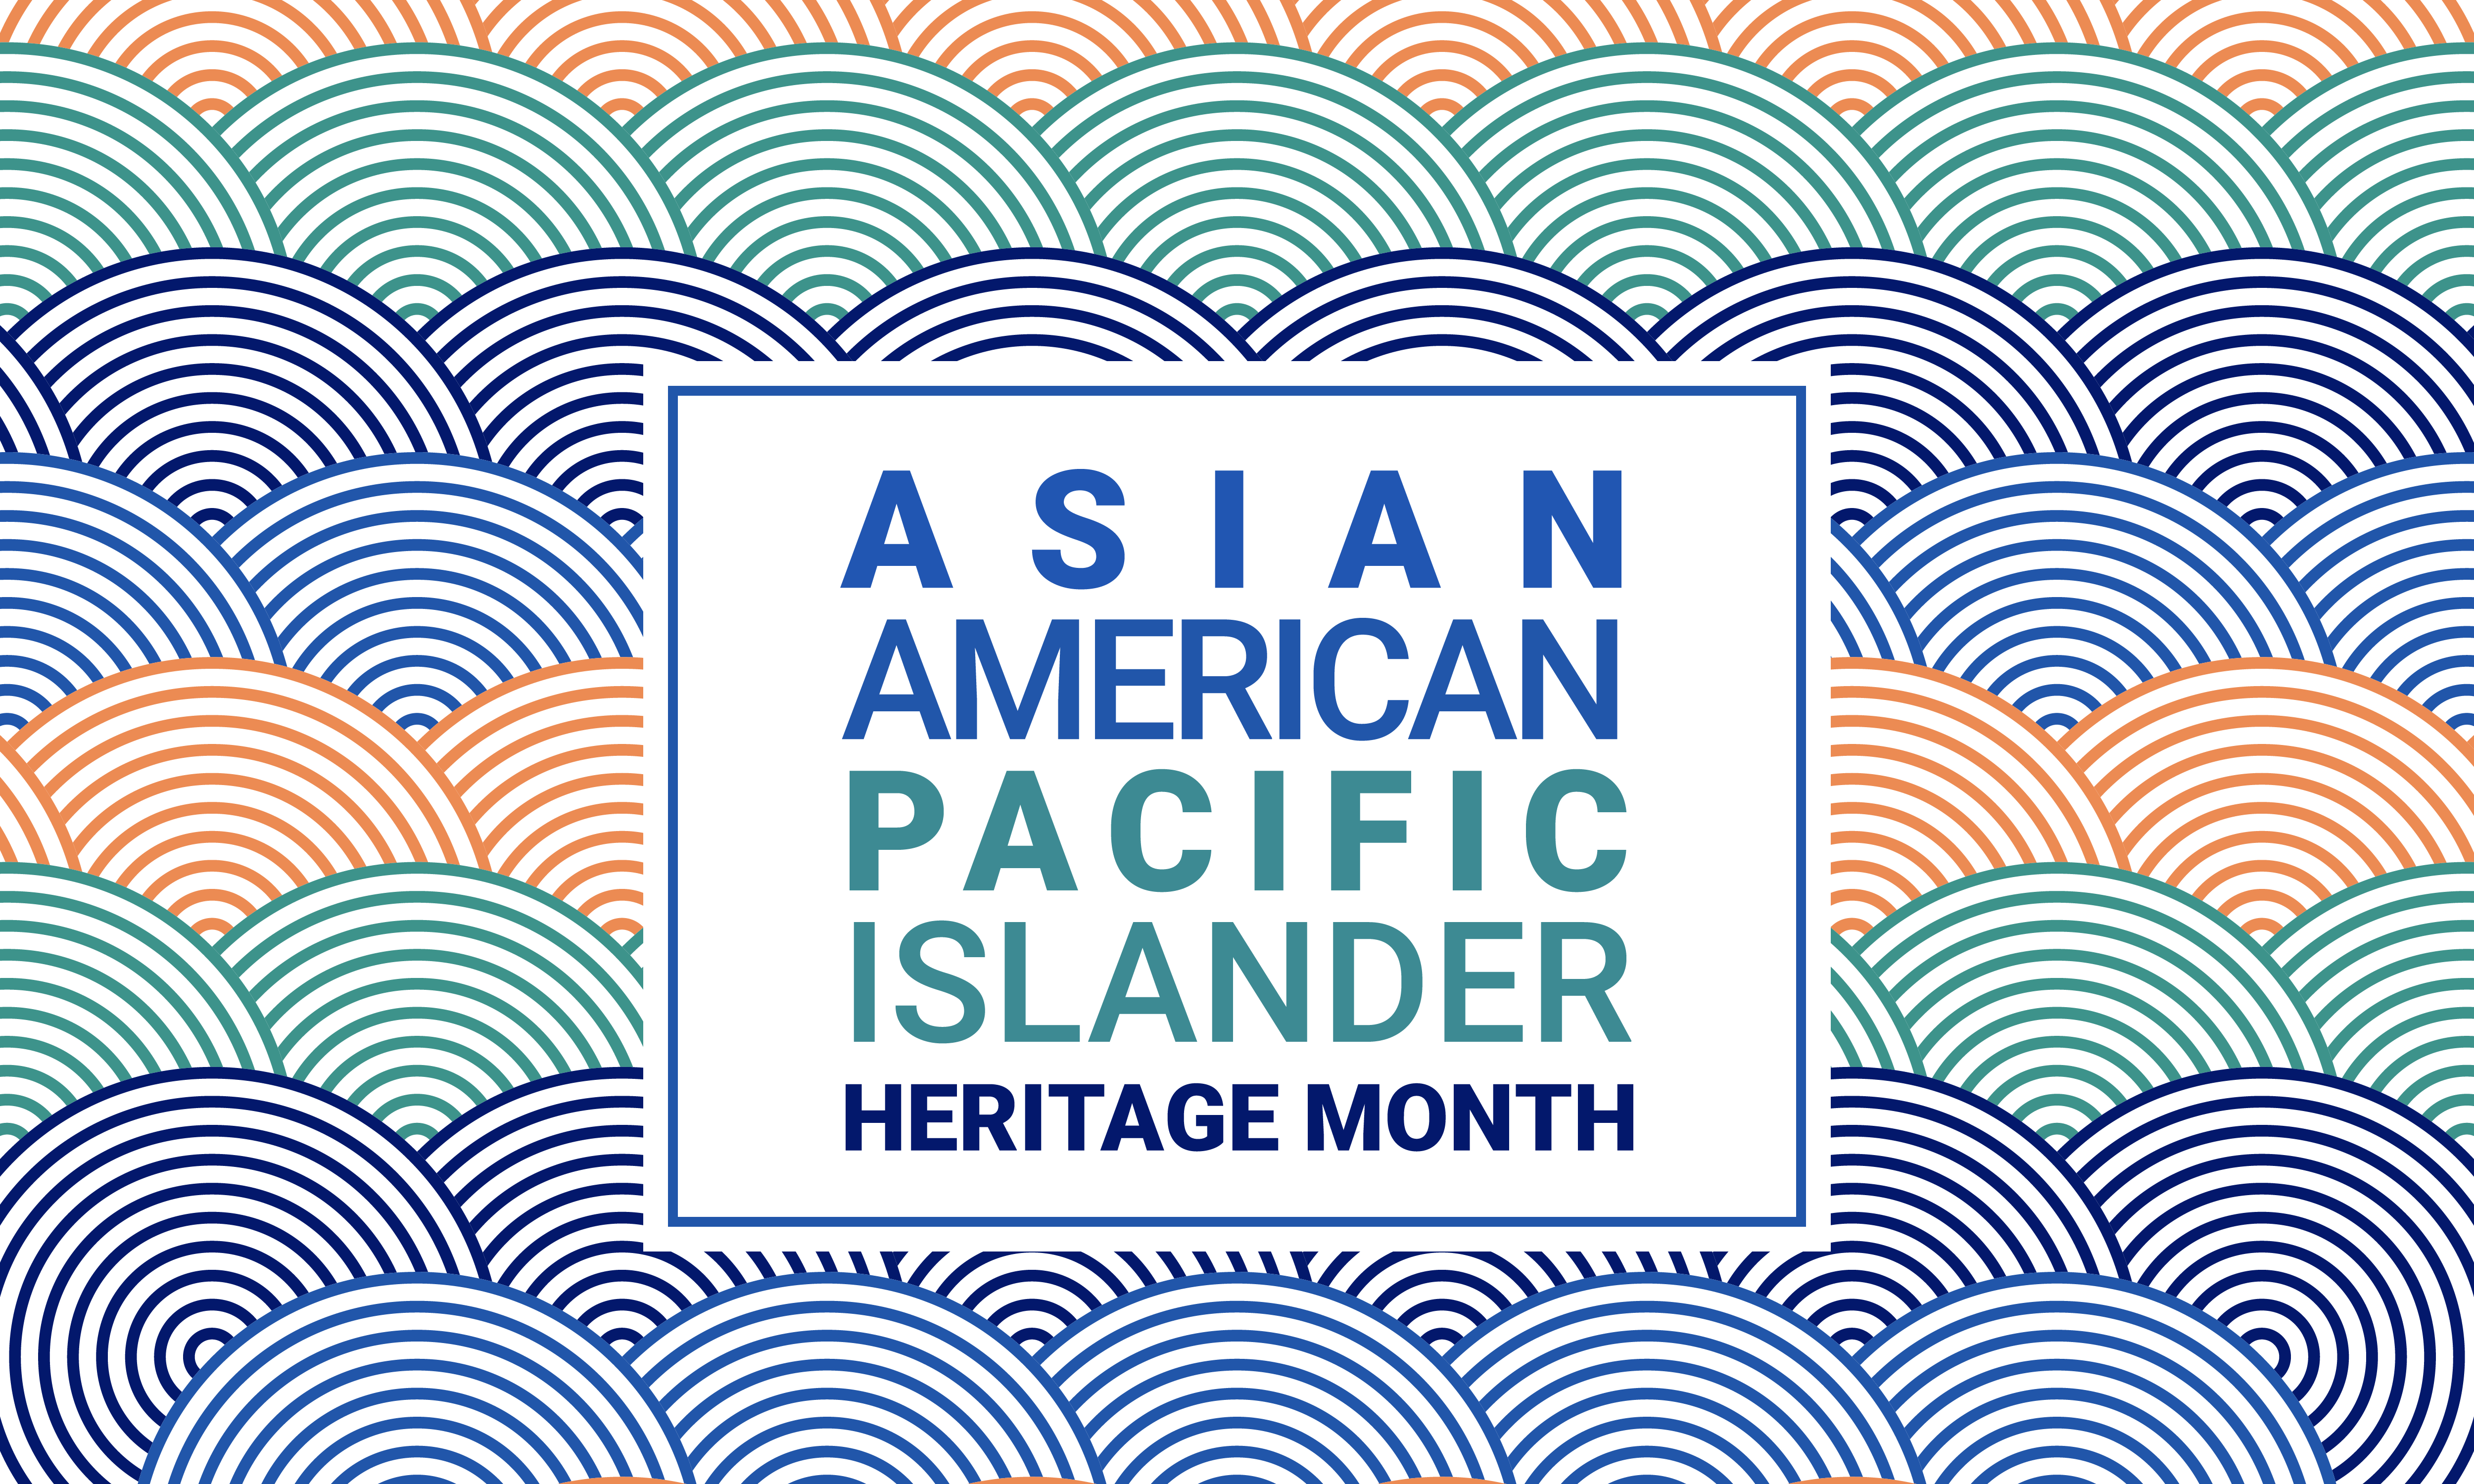 Graphic with text that reads "Asian American Pacific Islander Heritage Month" on a background of concentric circles